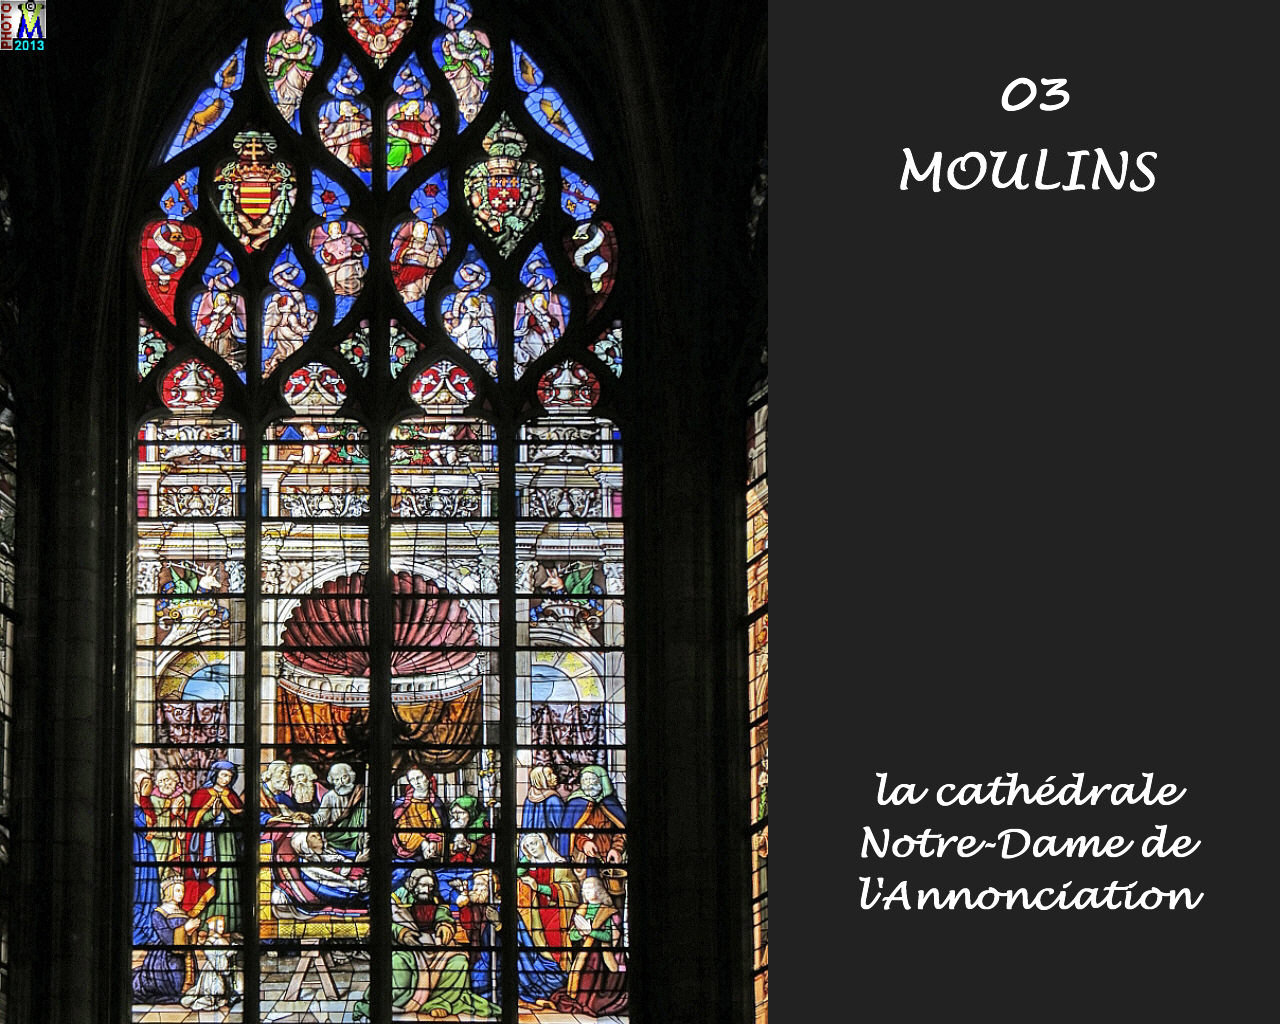 03MOULINS_cathedrale_214.jpg